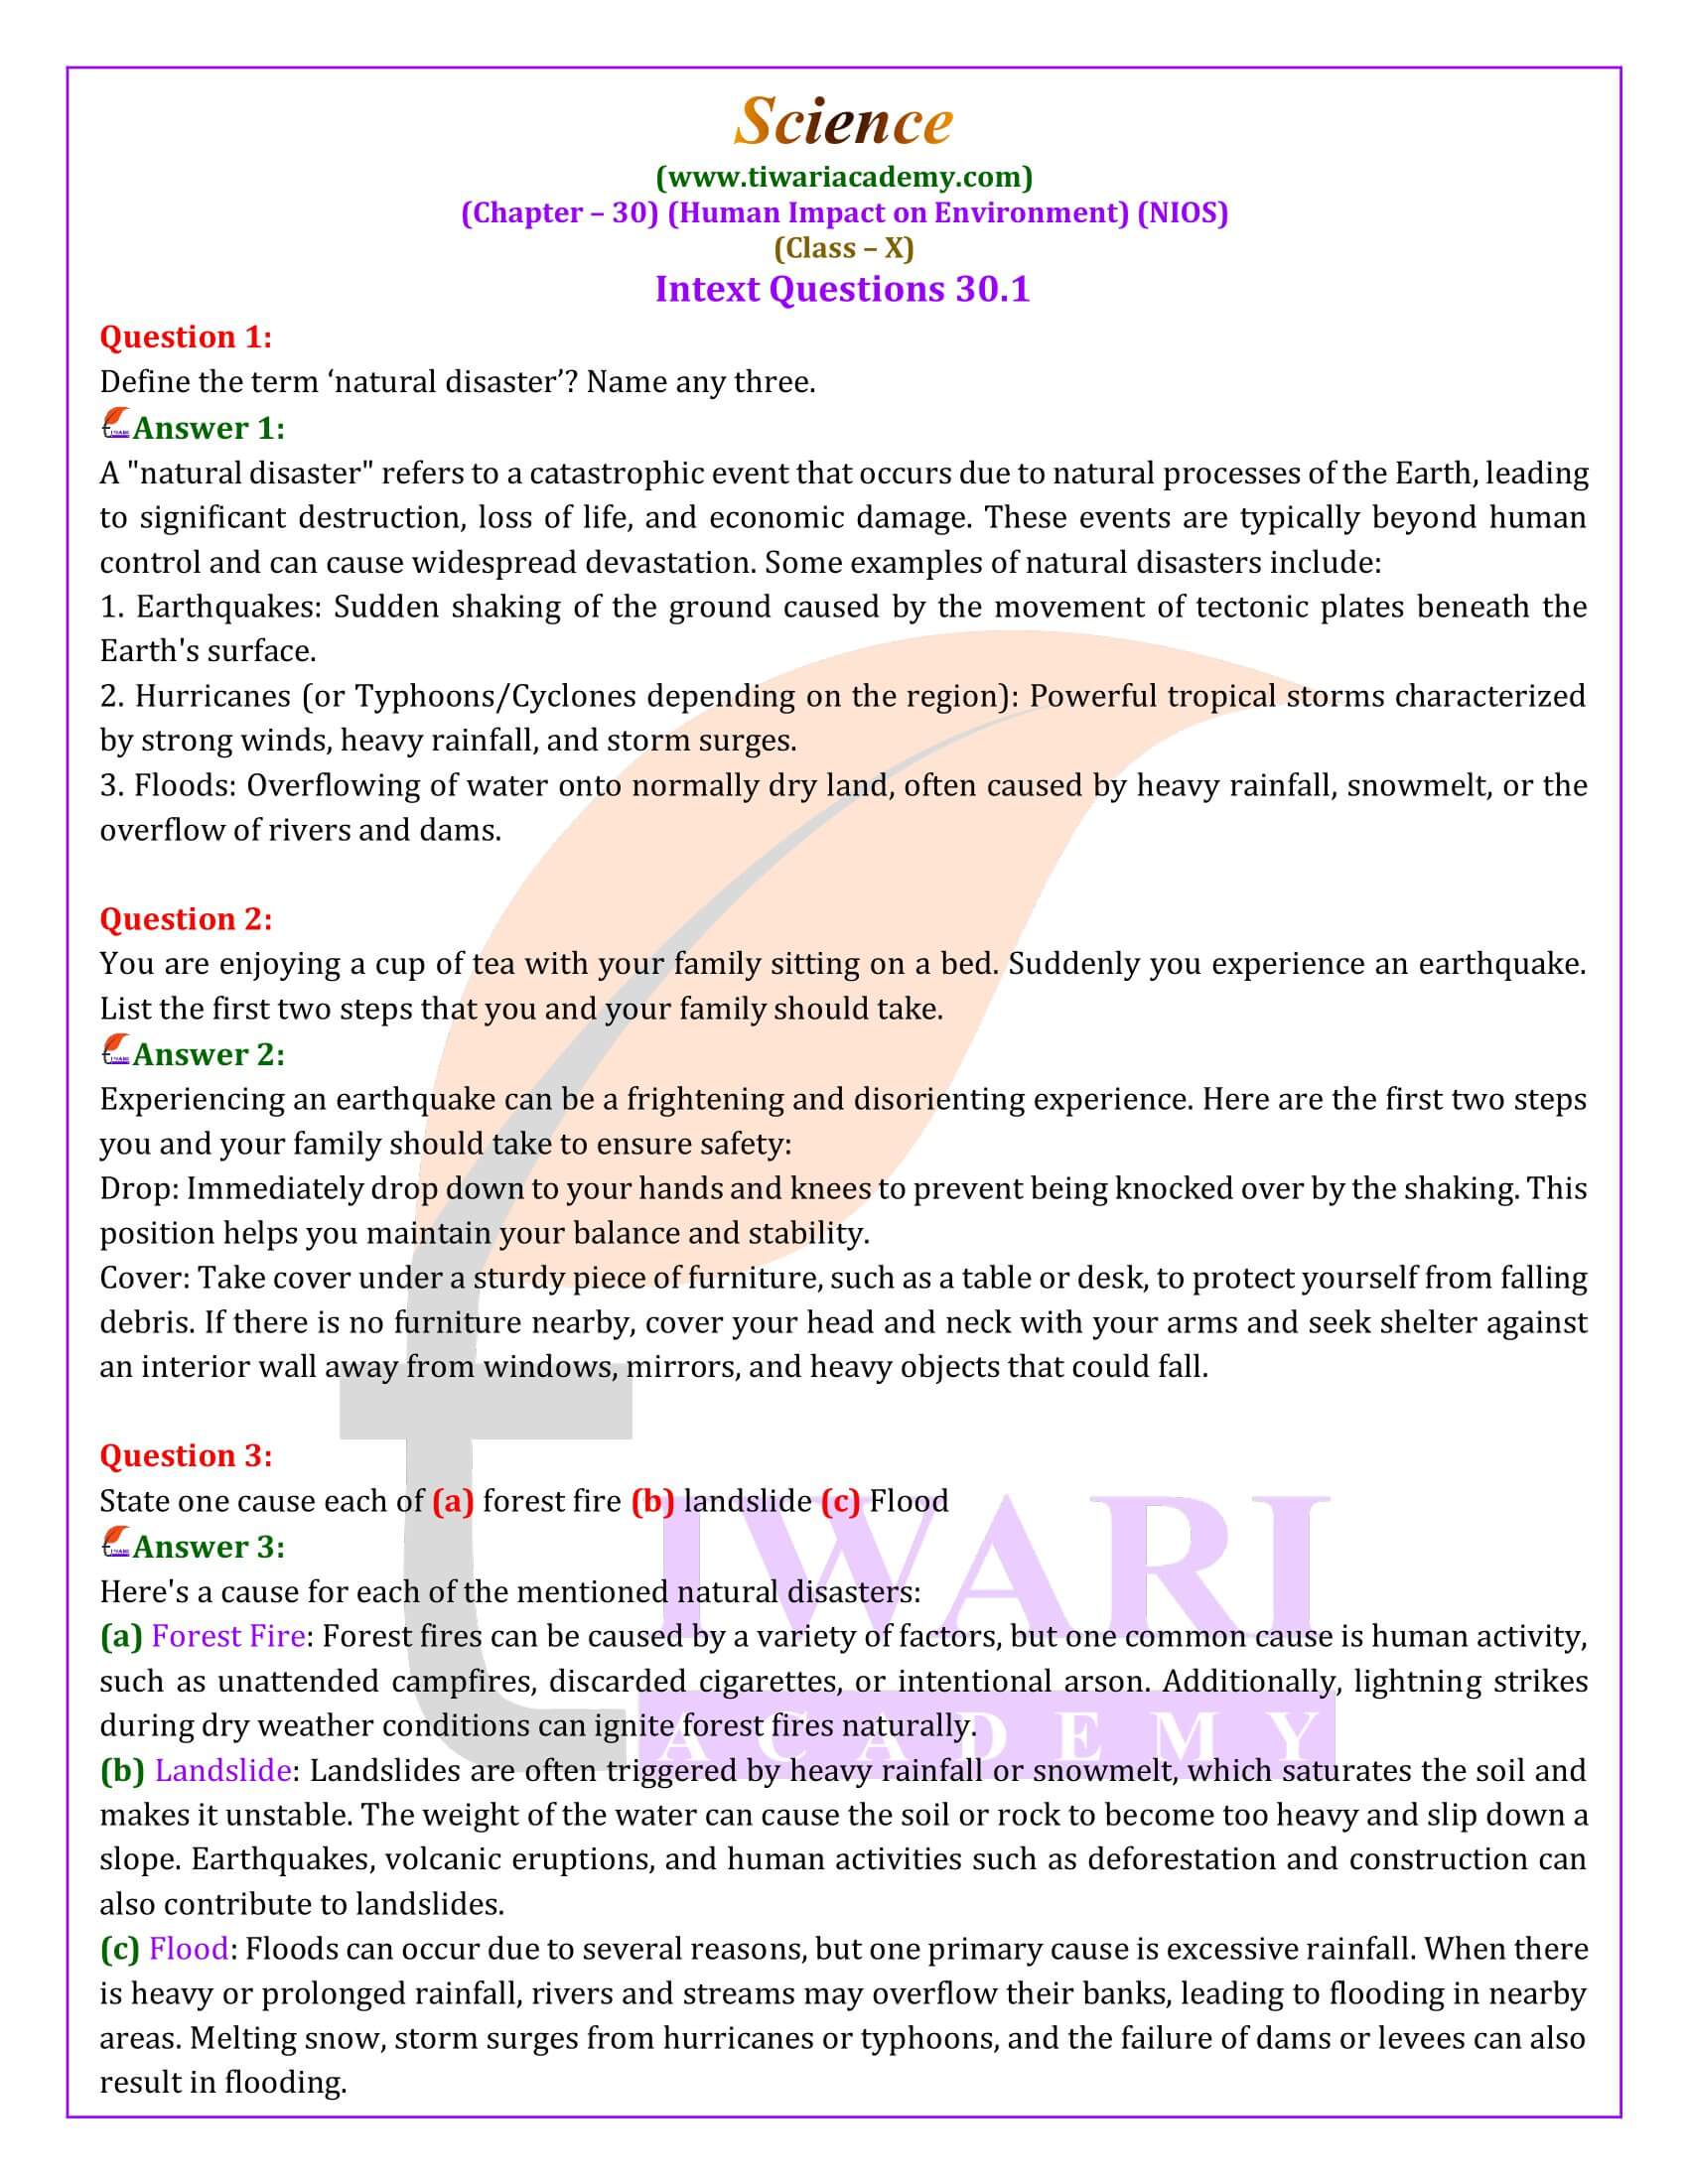 NIOS Class 10 Science Chapter 30 Human Impact on Environment Answers